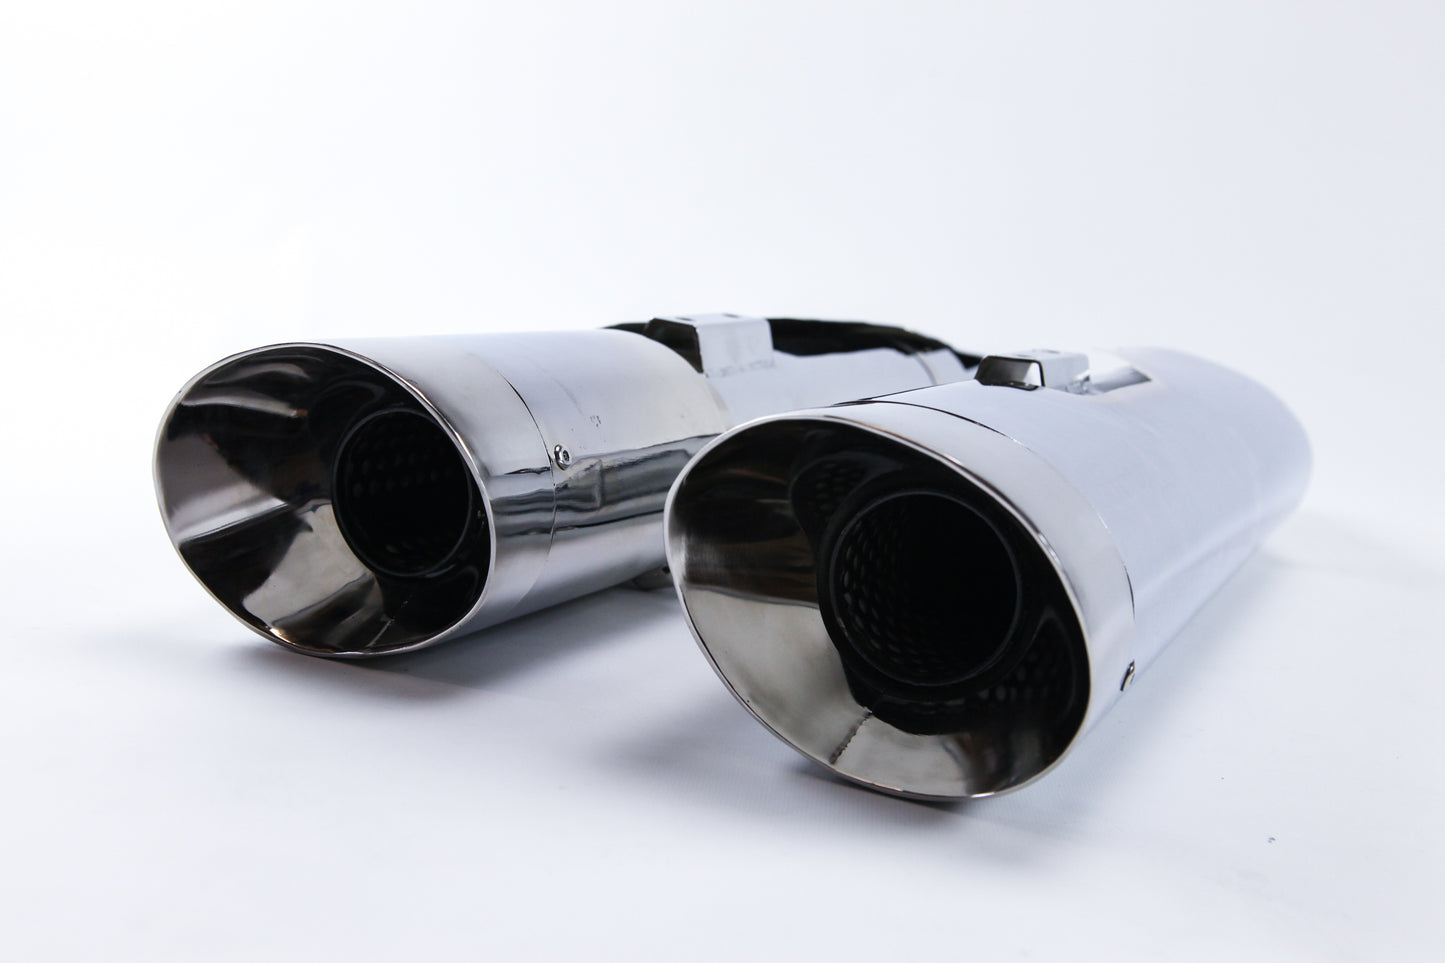 1998-2013 Monster Slip-On Mufflers Harley Davidson Oval Exhaust Pipes Touring Glide